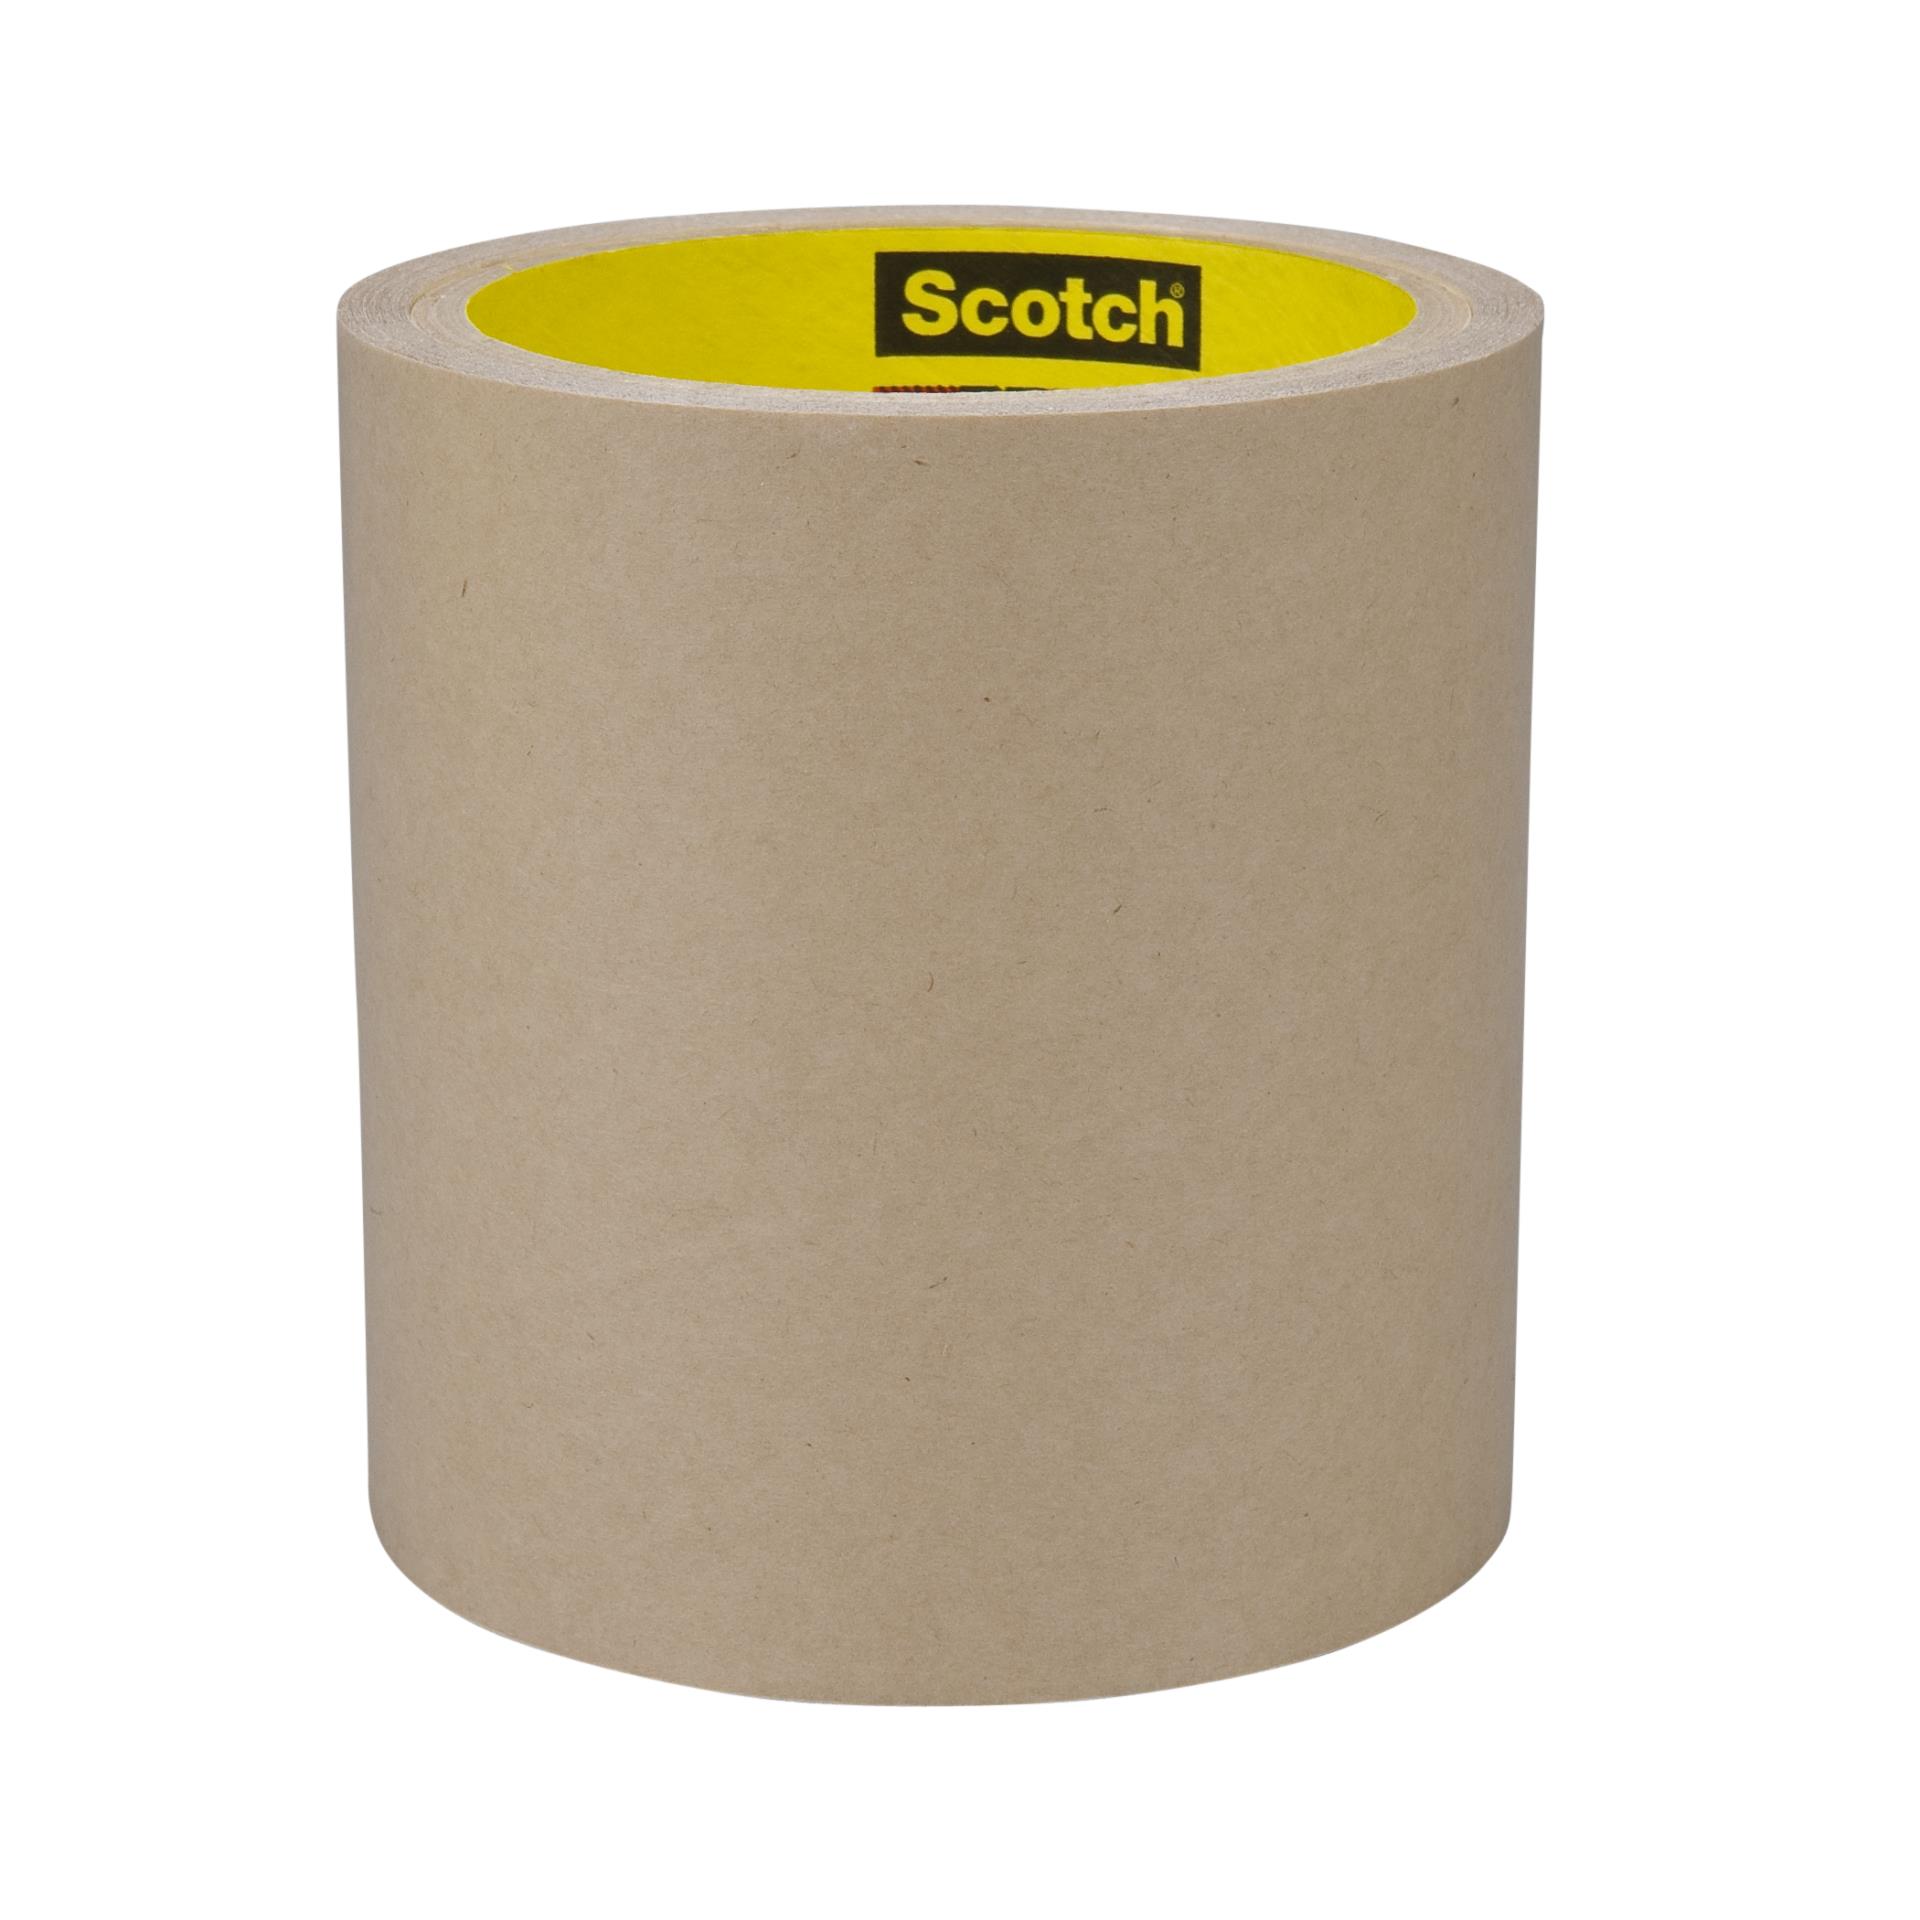 3M Scotch 700 ATG Adhesive Transfer Tape Applicator for 1/2" to 3/4" max 60 yds 